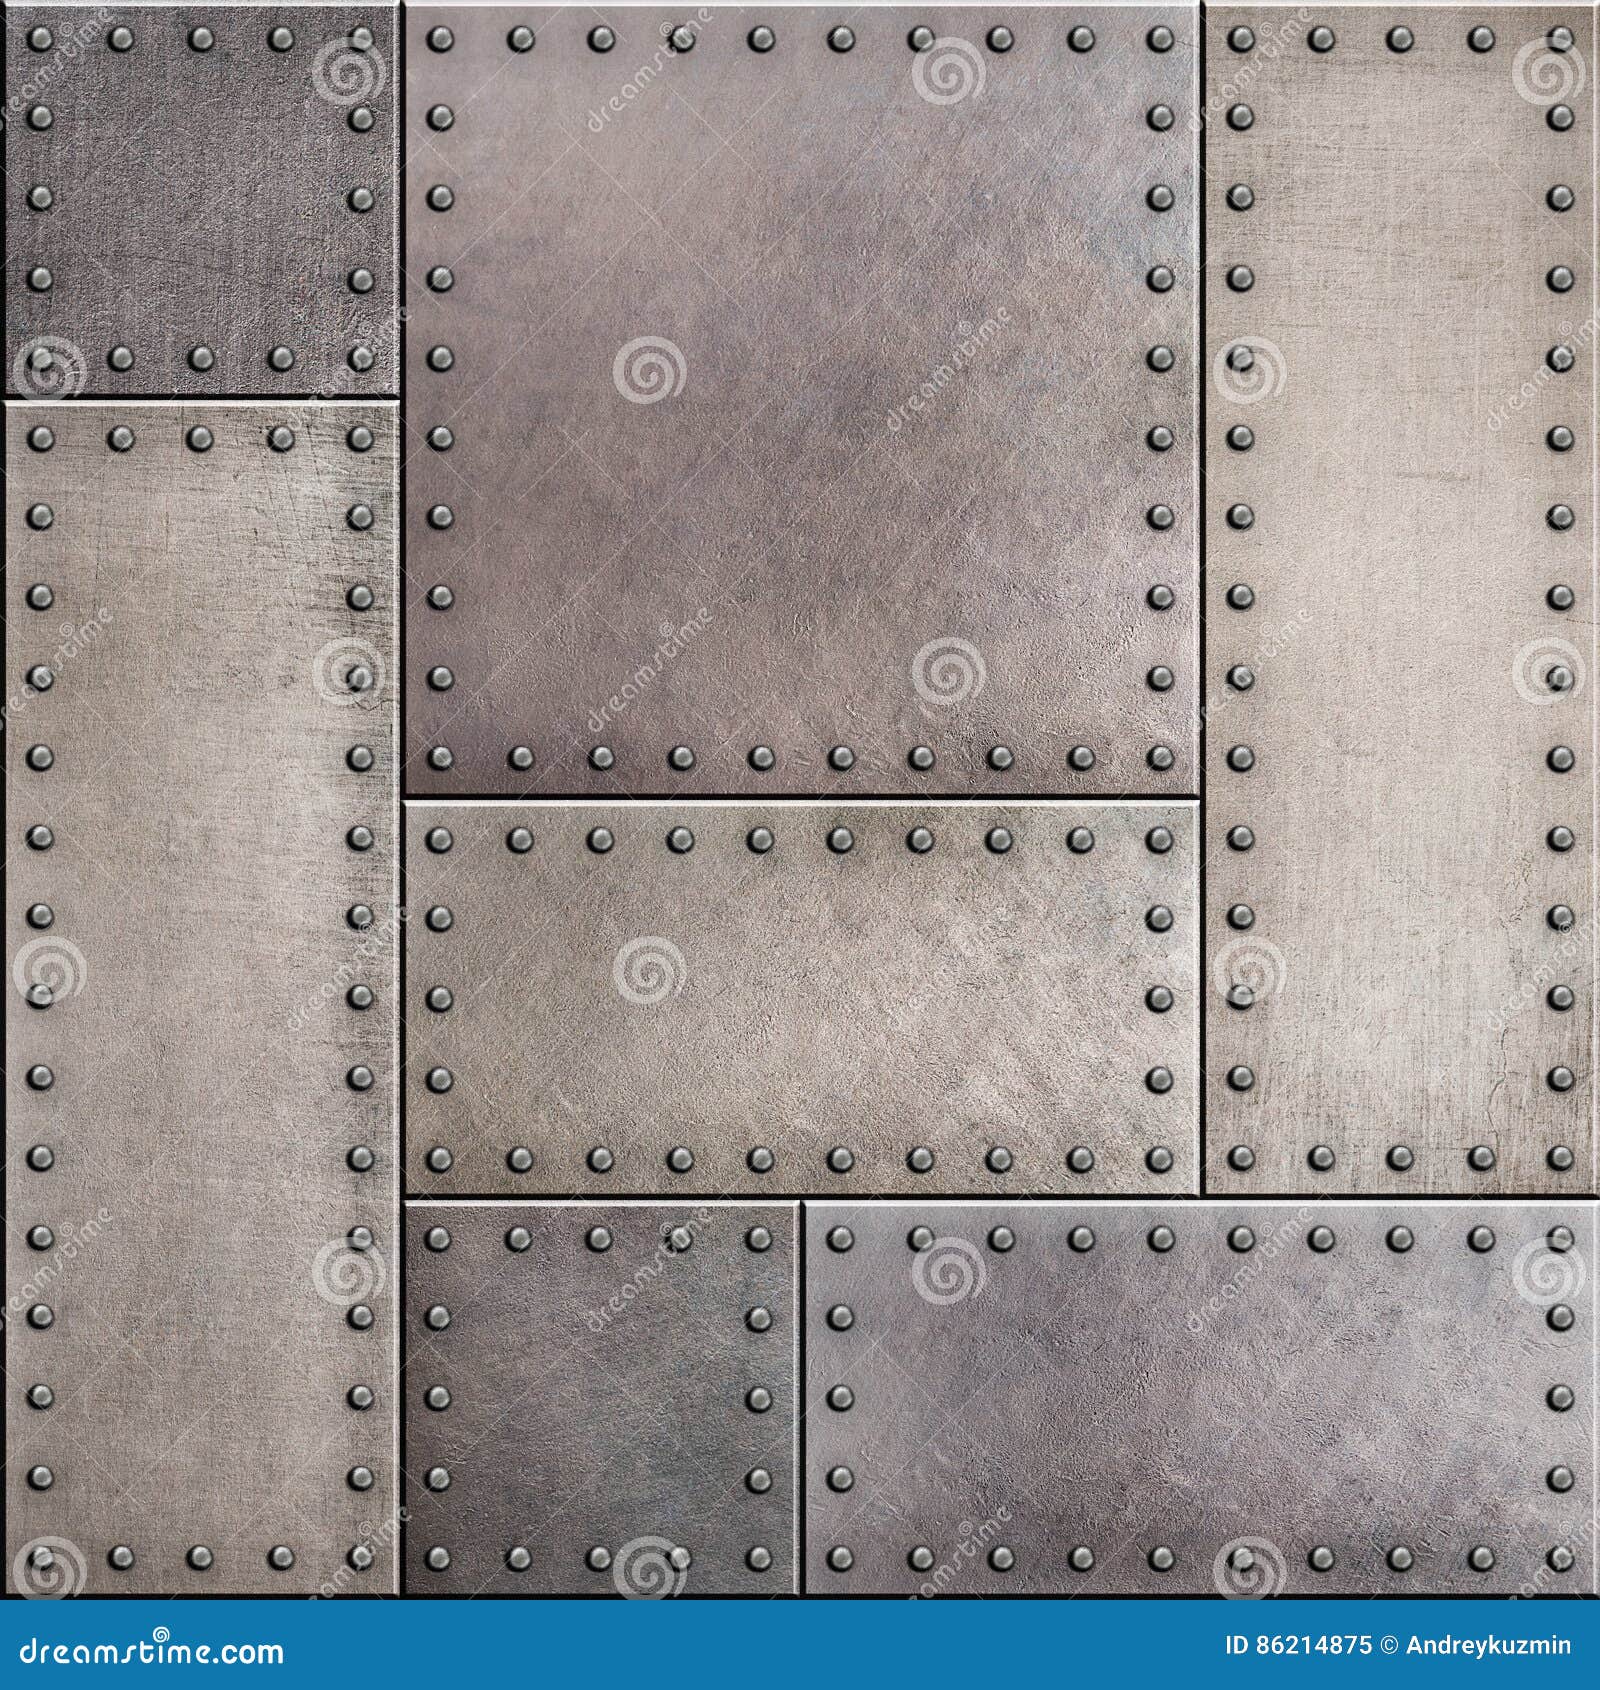 rusty metal plates with rivets seamless background or texture